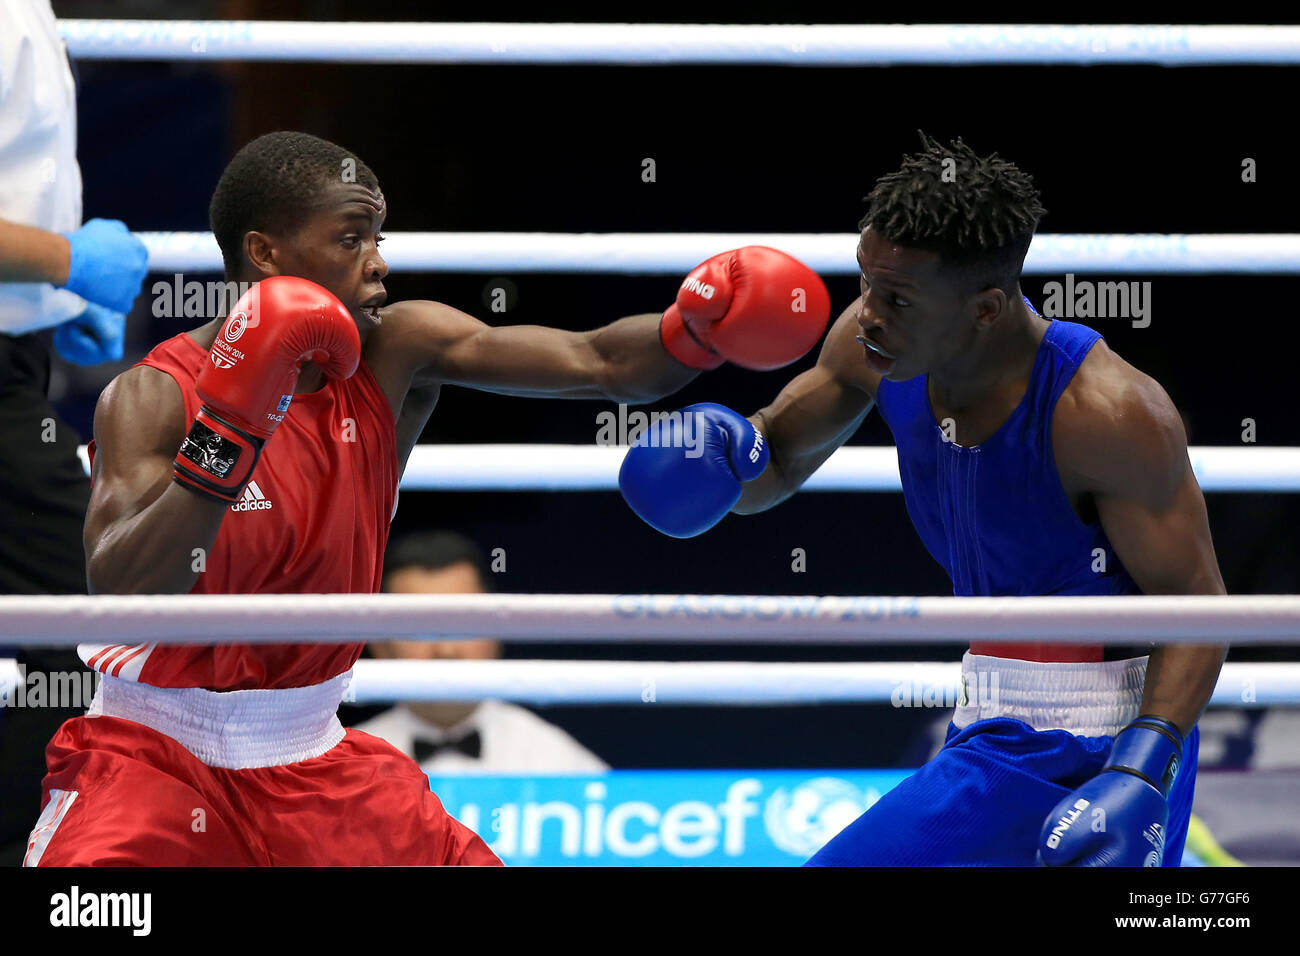 Zambia's Charles Lumbwe in action against Mozambique's Bernado Marrime (right) in the Men's Light Welter round of 32 match at the SECC during the 2014 Commonwealth Games in Glasgow. Stock Photo